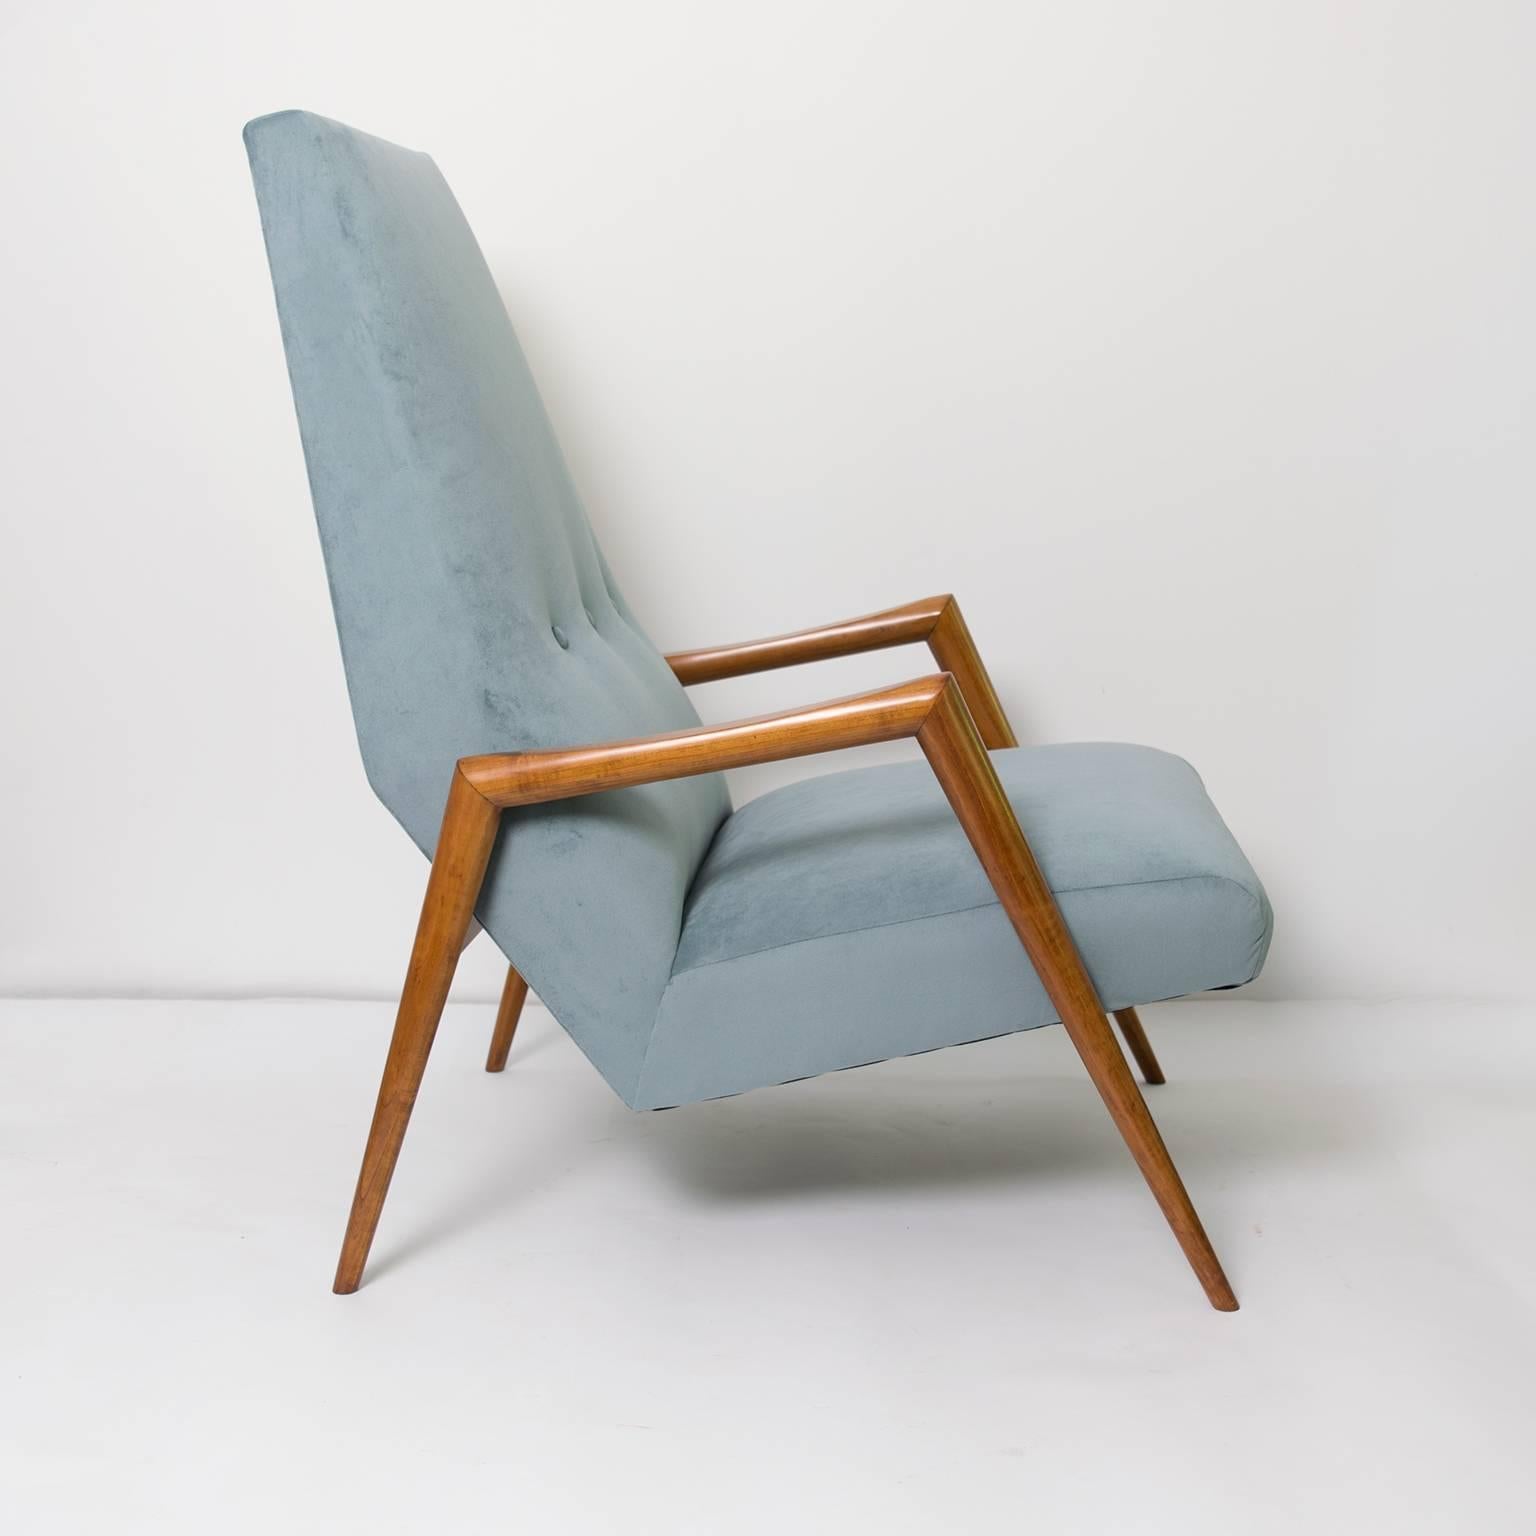 A Scandinavian modern high back carved fruit wood lounge chair, newly restored and upholstered in pale blue velvet fabric. 
 
Measures: Height 38.5", width 26", depth 33", Seat height 17".